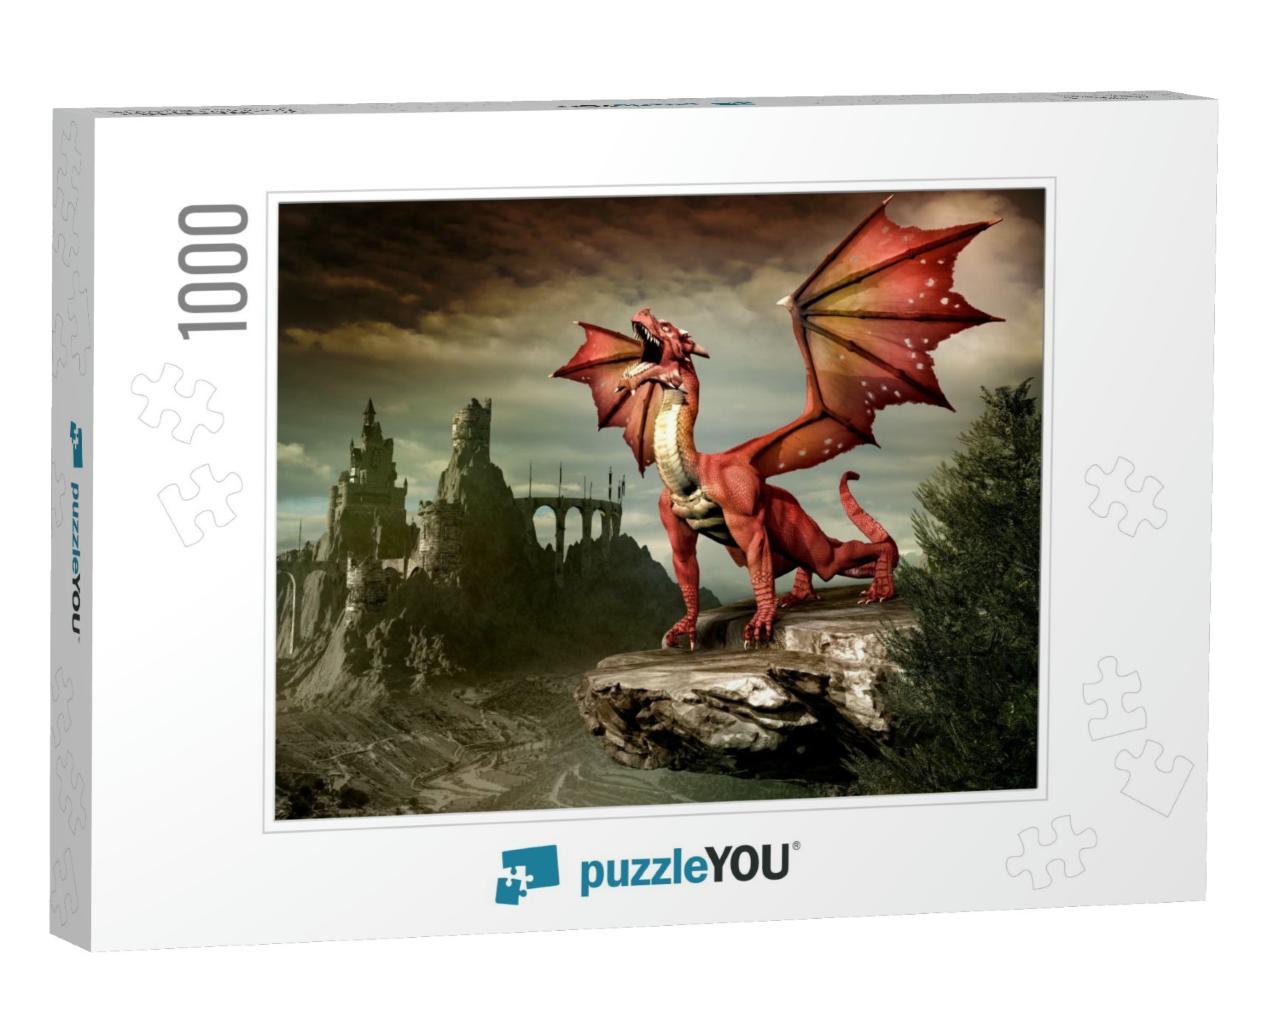 Fantasy Scenery with Red Dragon & Castle Ruins... Jigsaw Puzzle with 1000 pieces